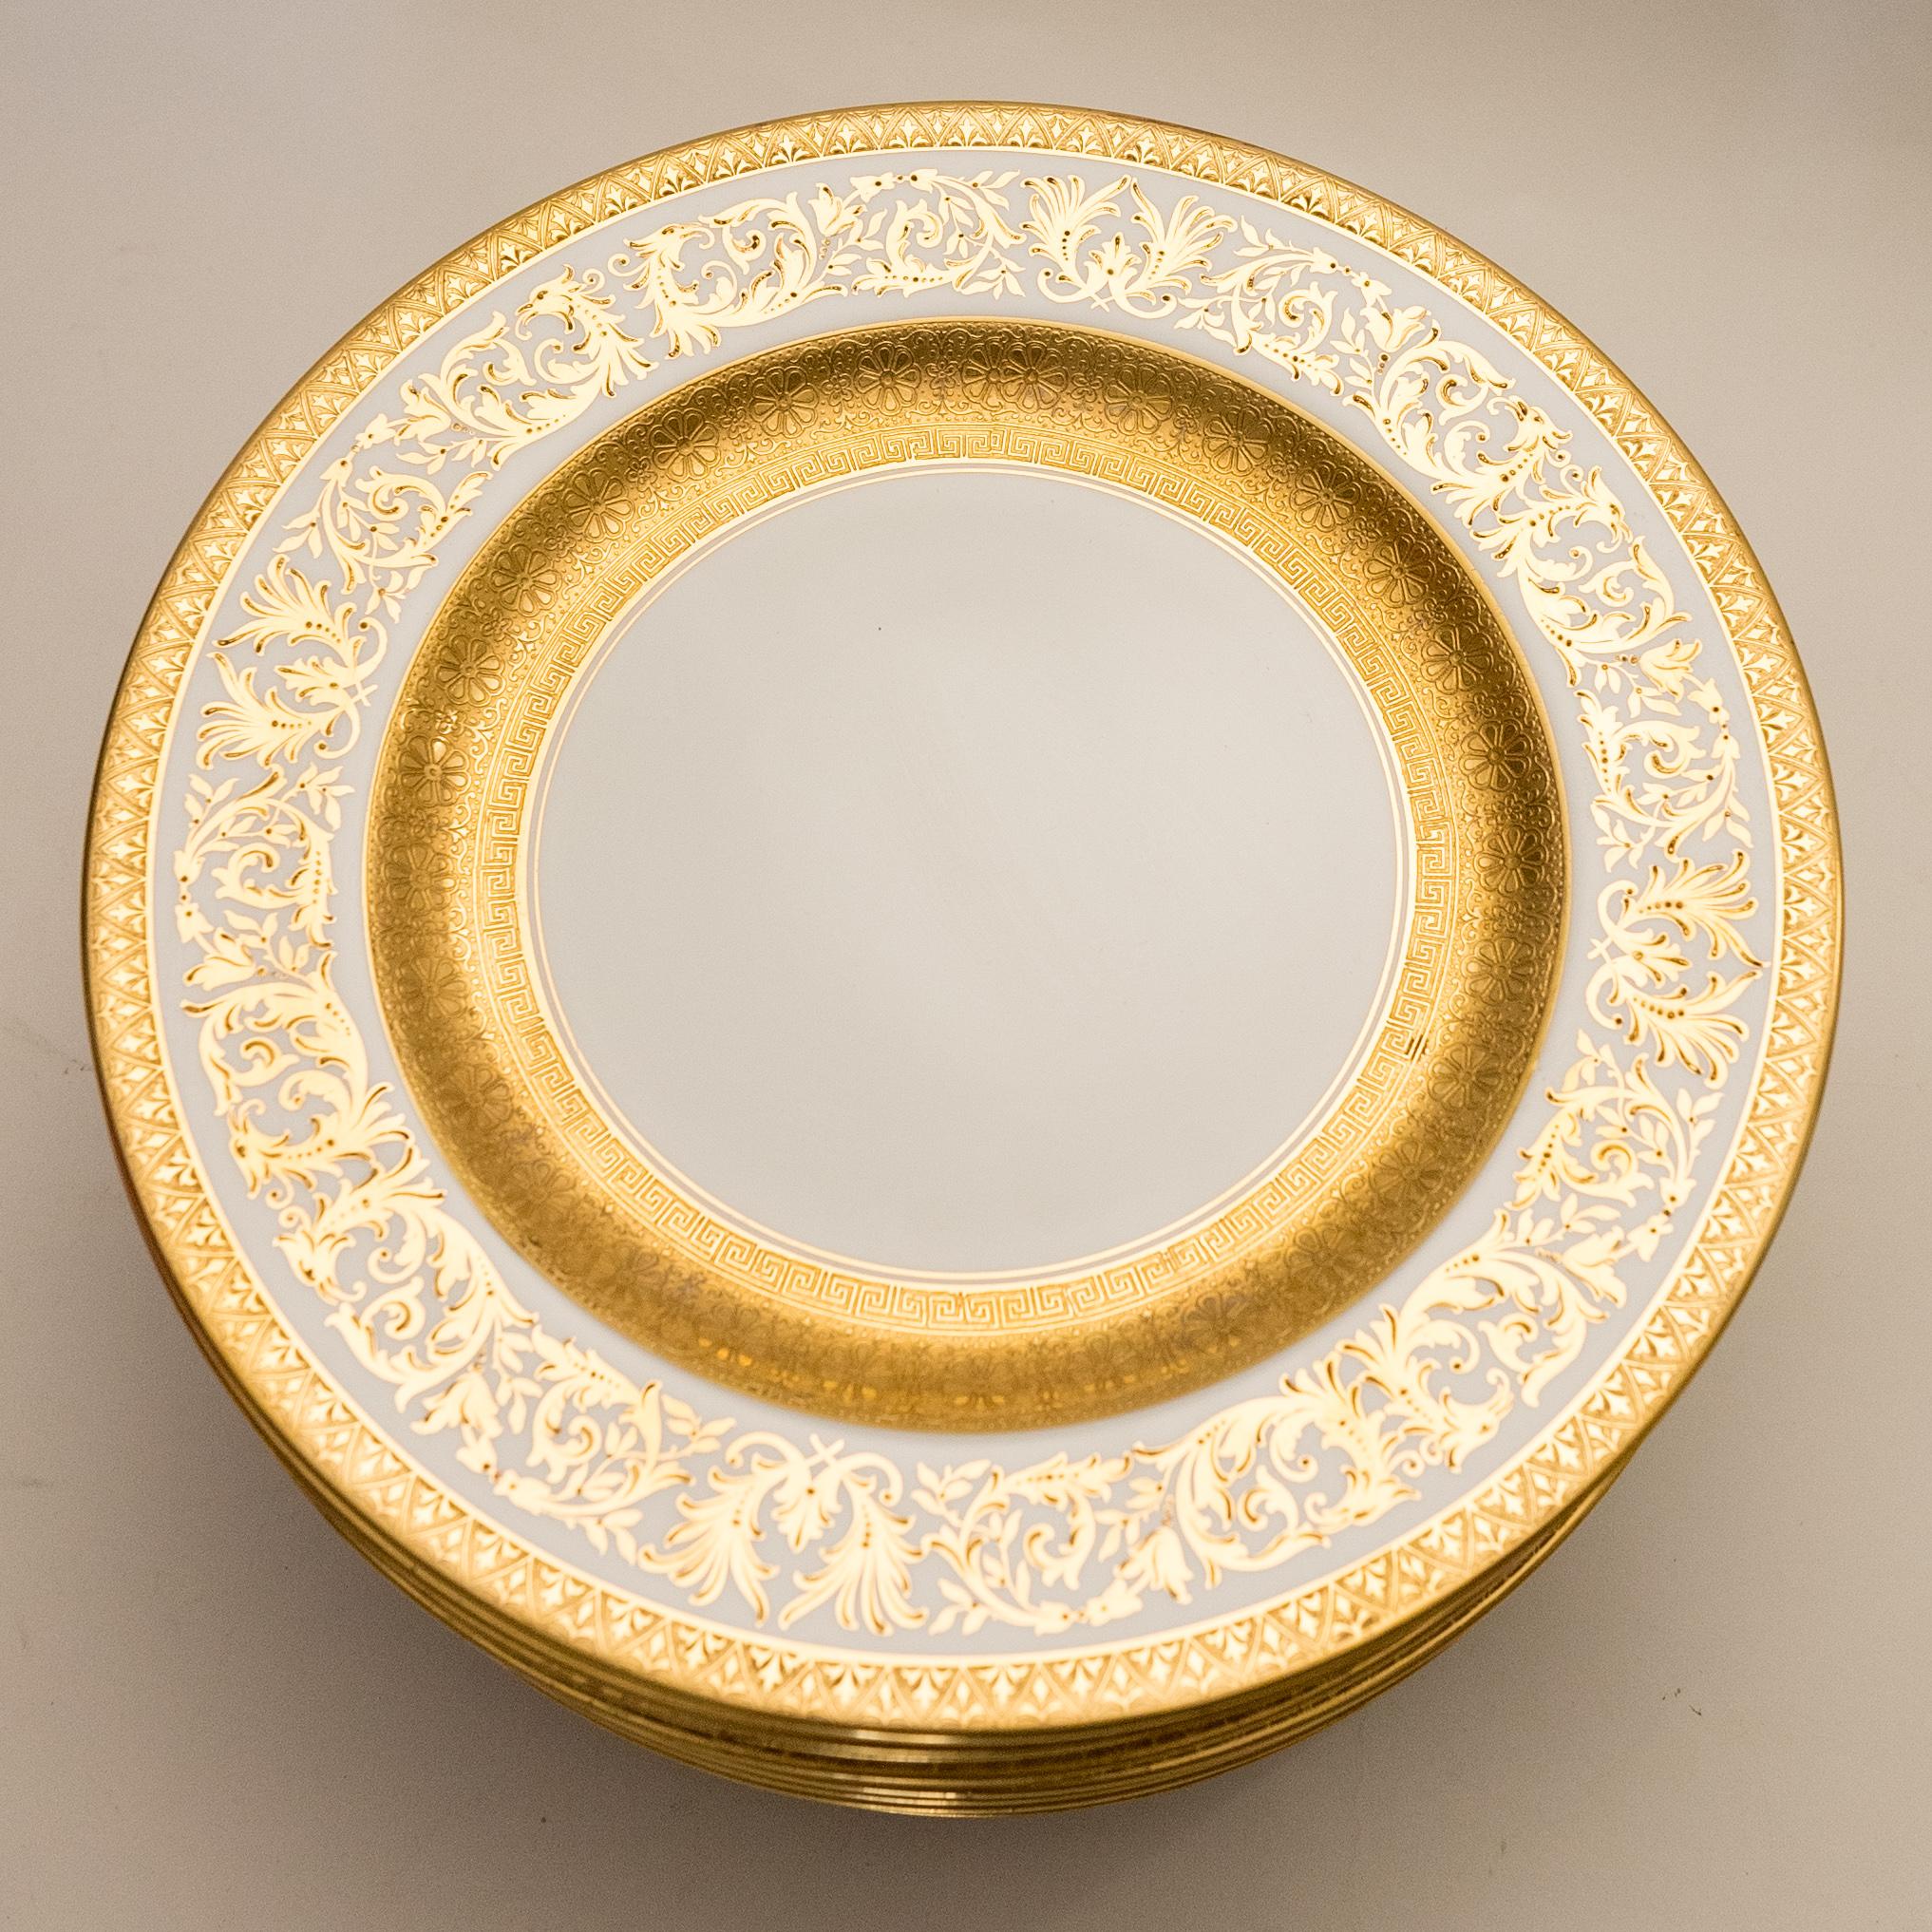 British 11 Gilt Encrusted Dinner Plates, Antique Custom Order with Wide Gold Banding